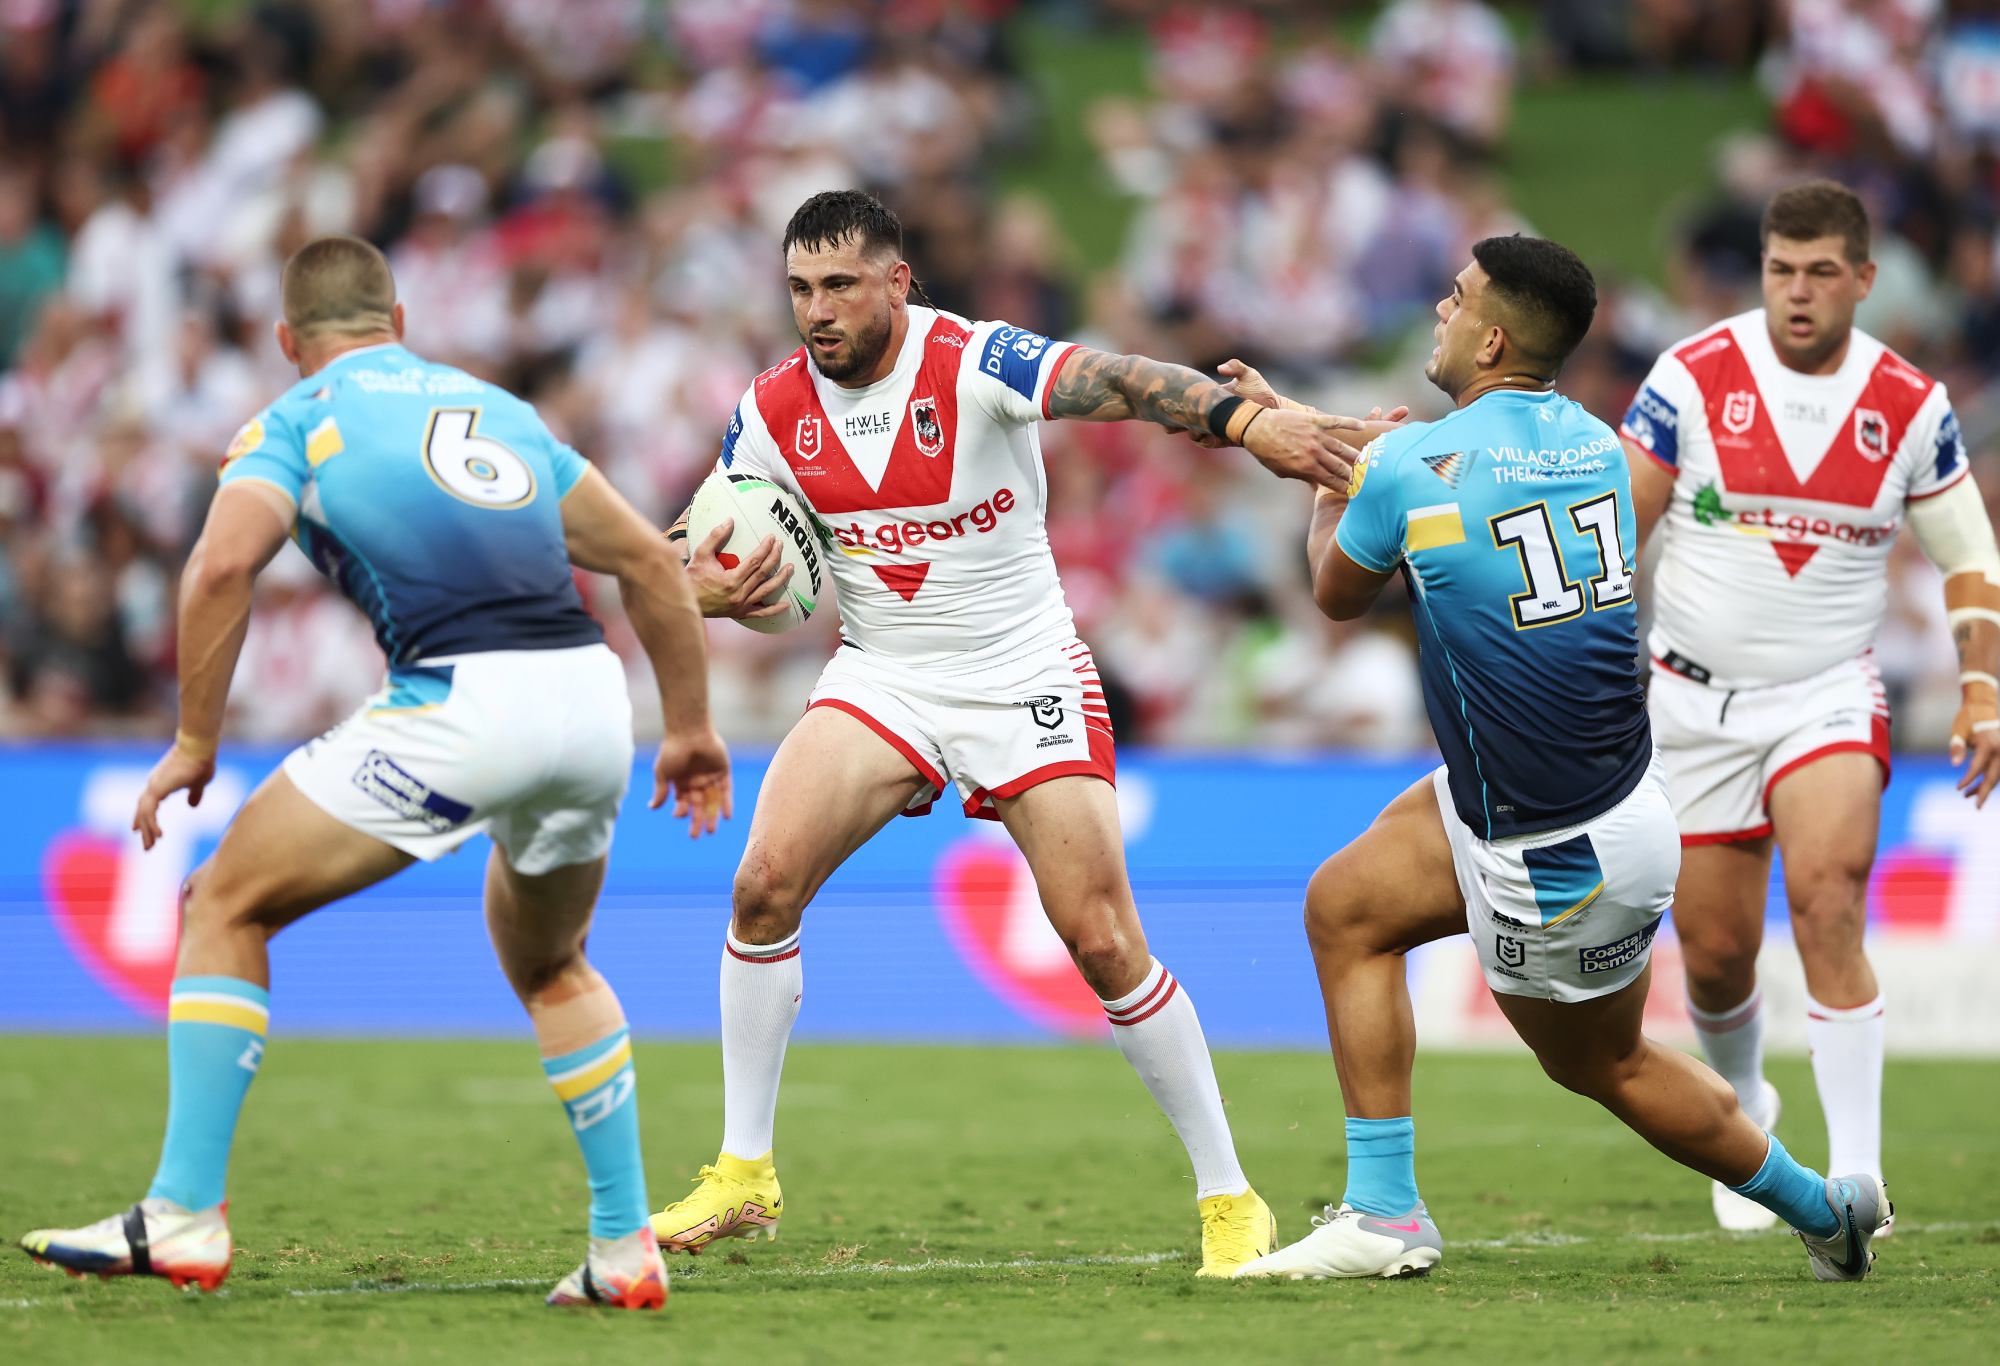 SYDNEY, AUSTRALIA - MARCH 12: Jack Bird of the Dragons is tackled during the round two NRL match between the St George Illawarra Dragons and the Gold Coast Titans at Netstrata Jubilee Stadium on March 12, 2023 in Sydney, Australia. (Photo by Matt King/Getty Images)